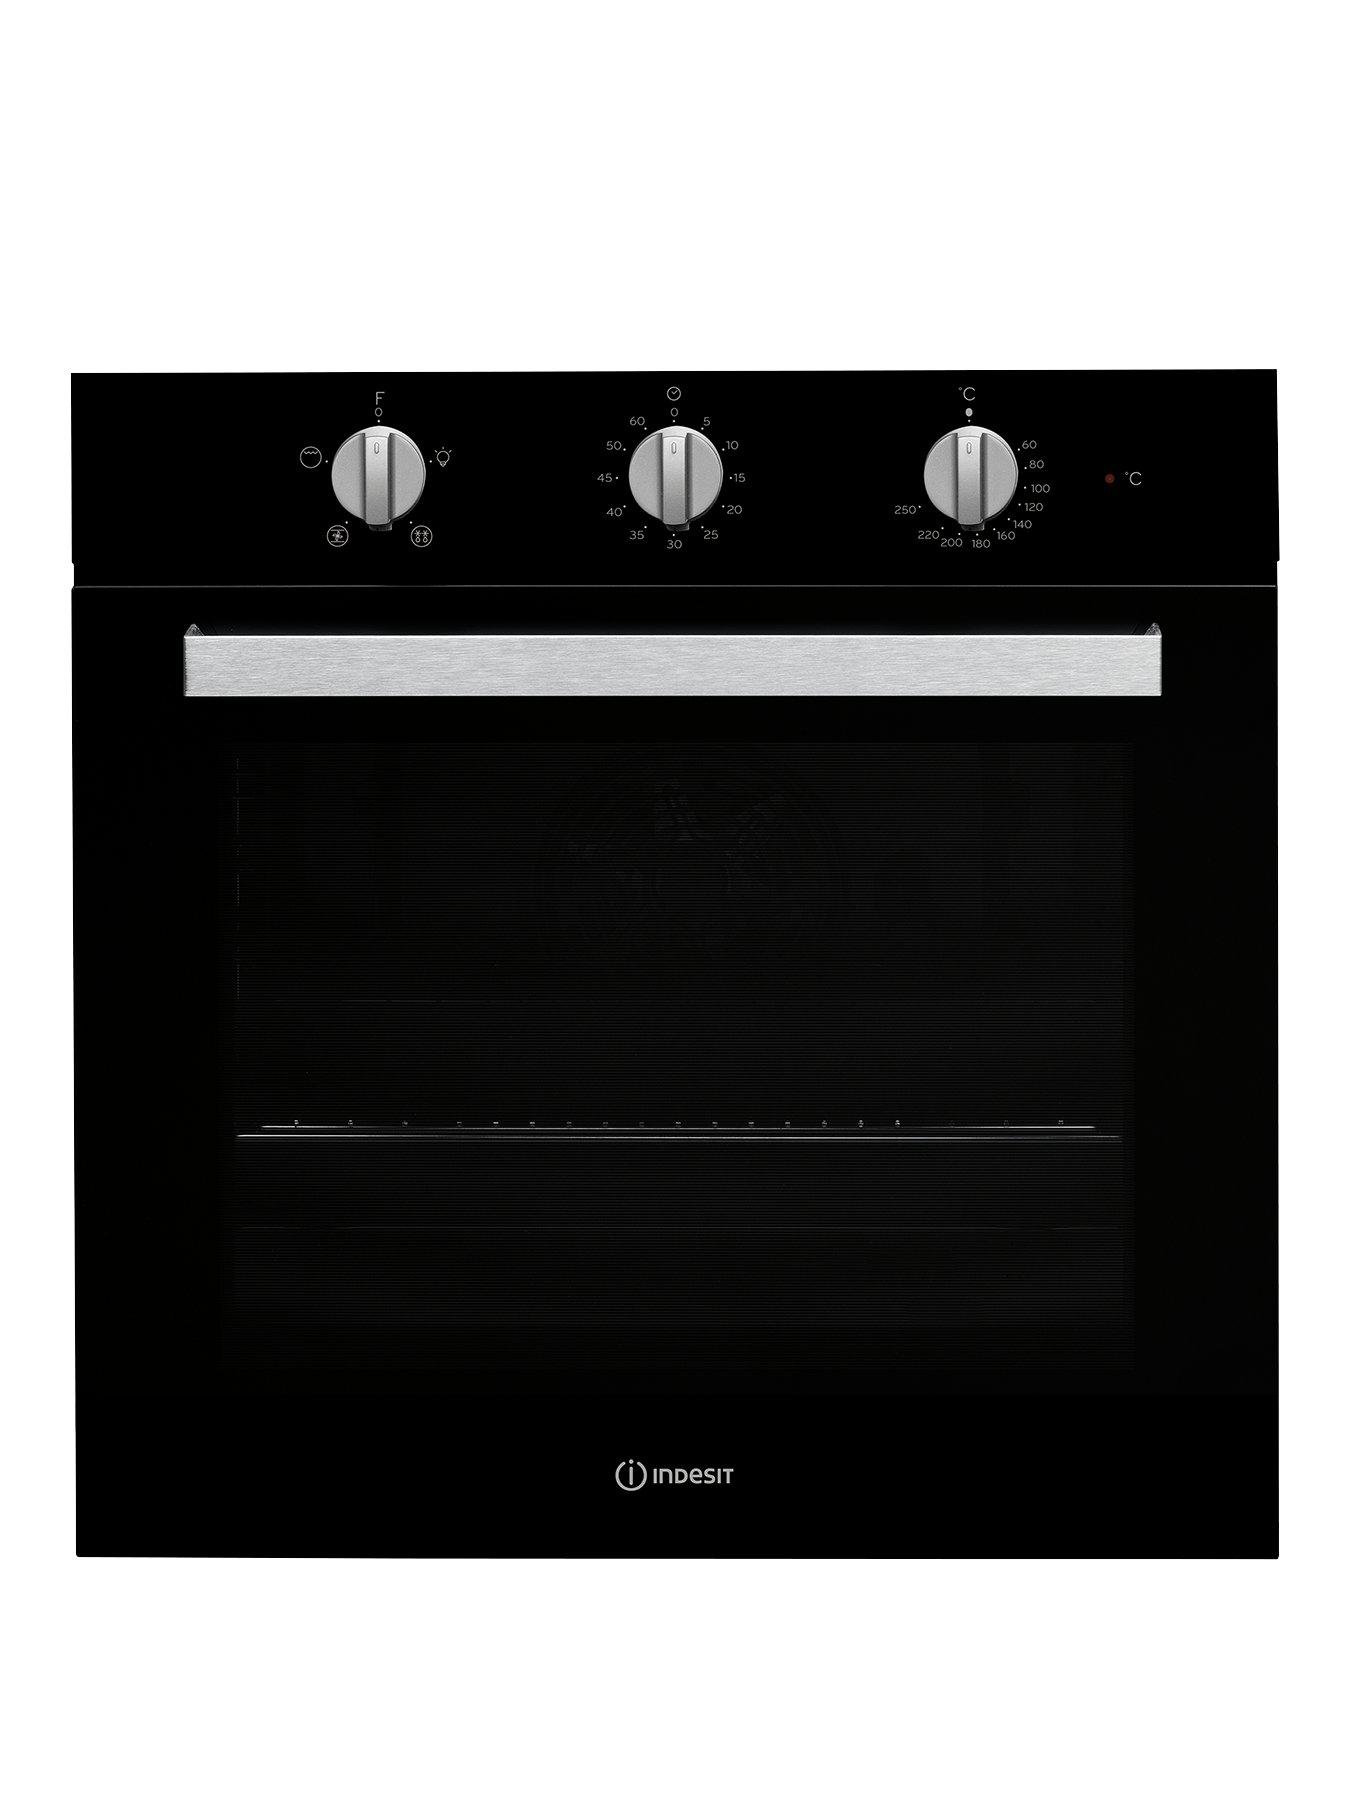 Indesit Aria Ifw6330Bluk Built-In Single Electric Oven  – Oven Only